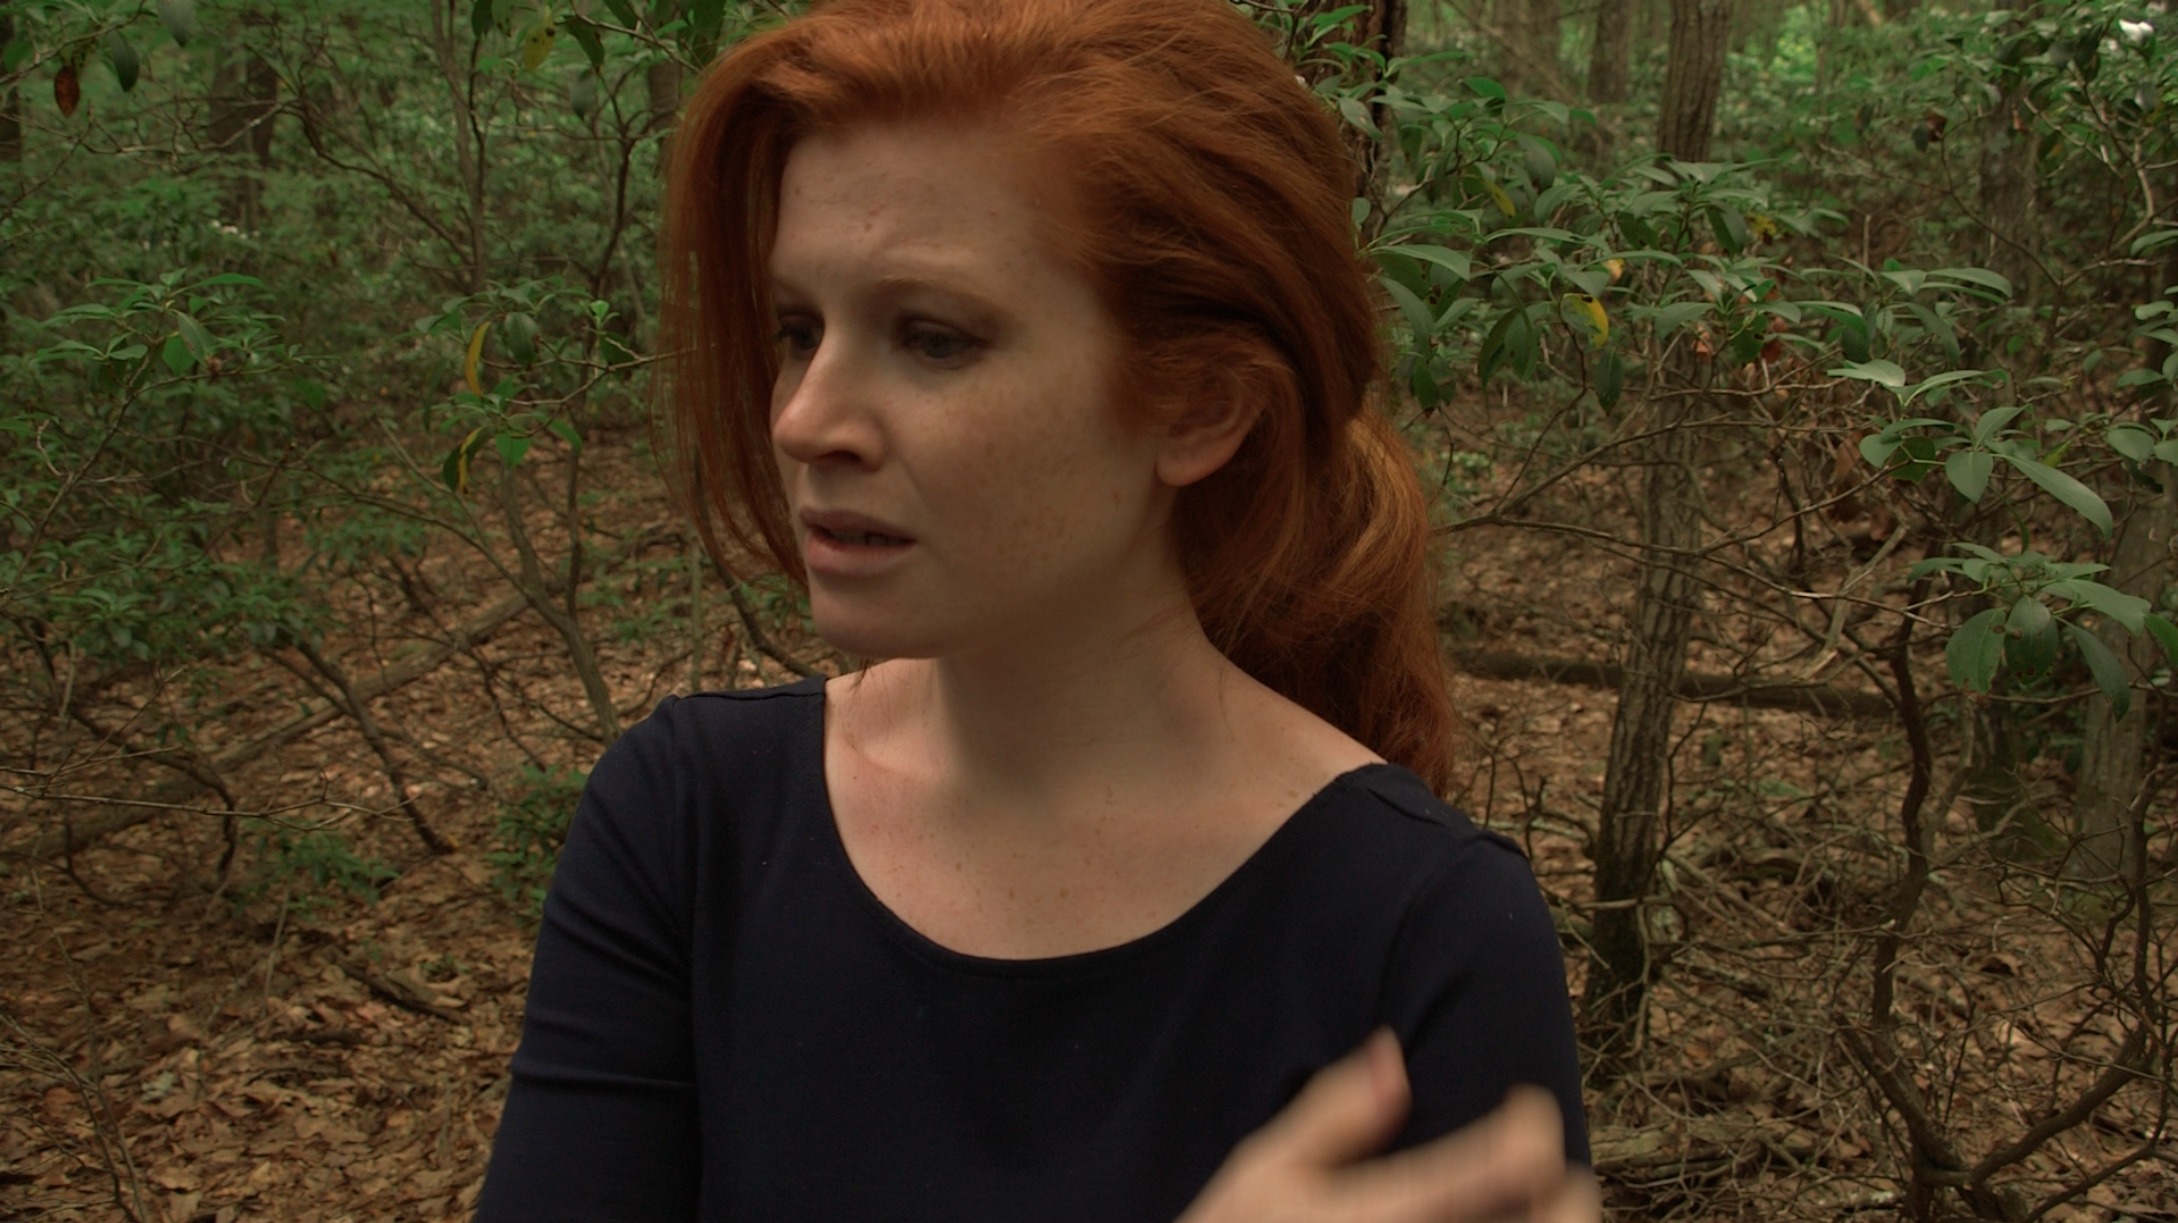 Emma as Hanna in upcoming short film, premiering in Fall 2014.